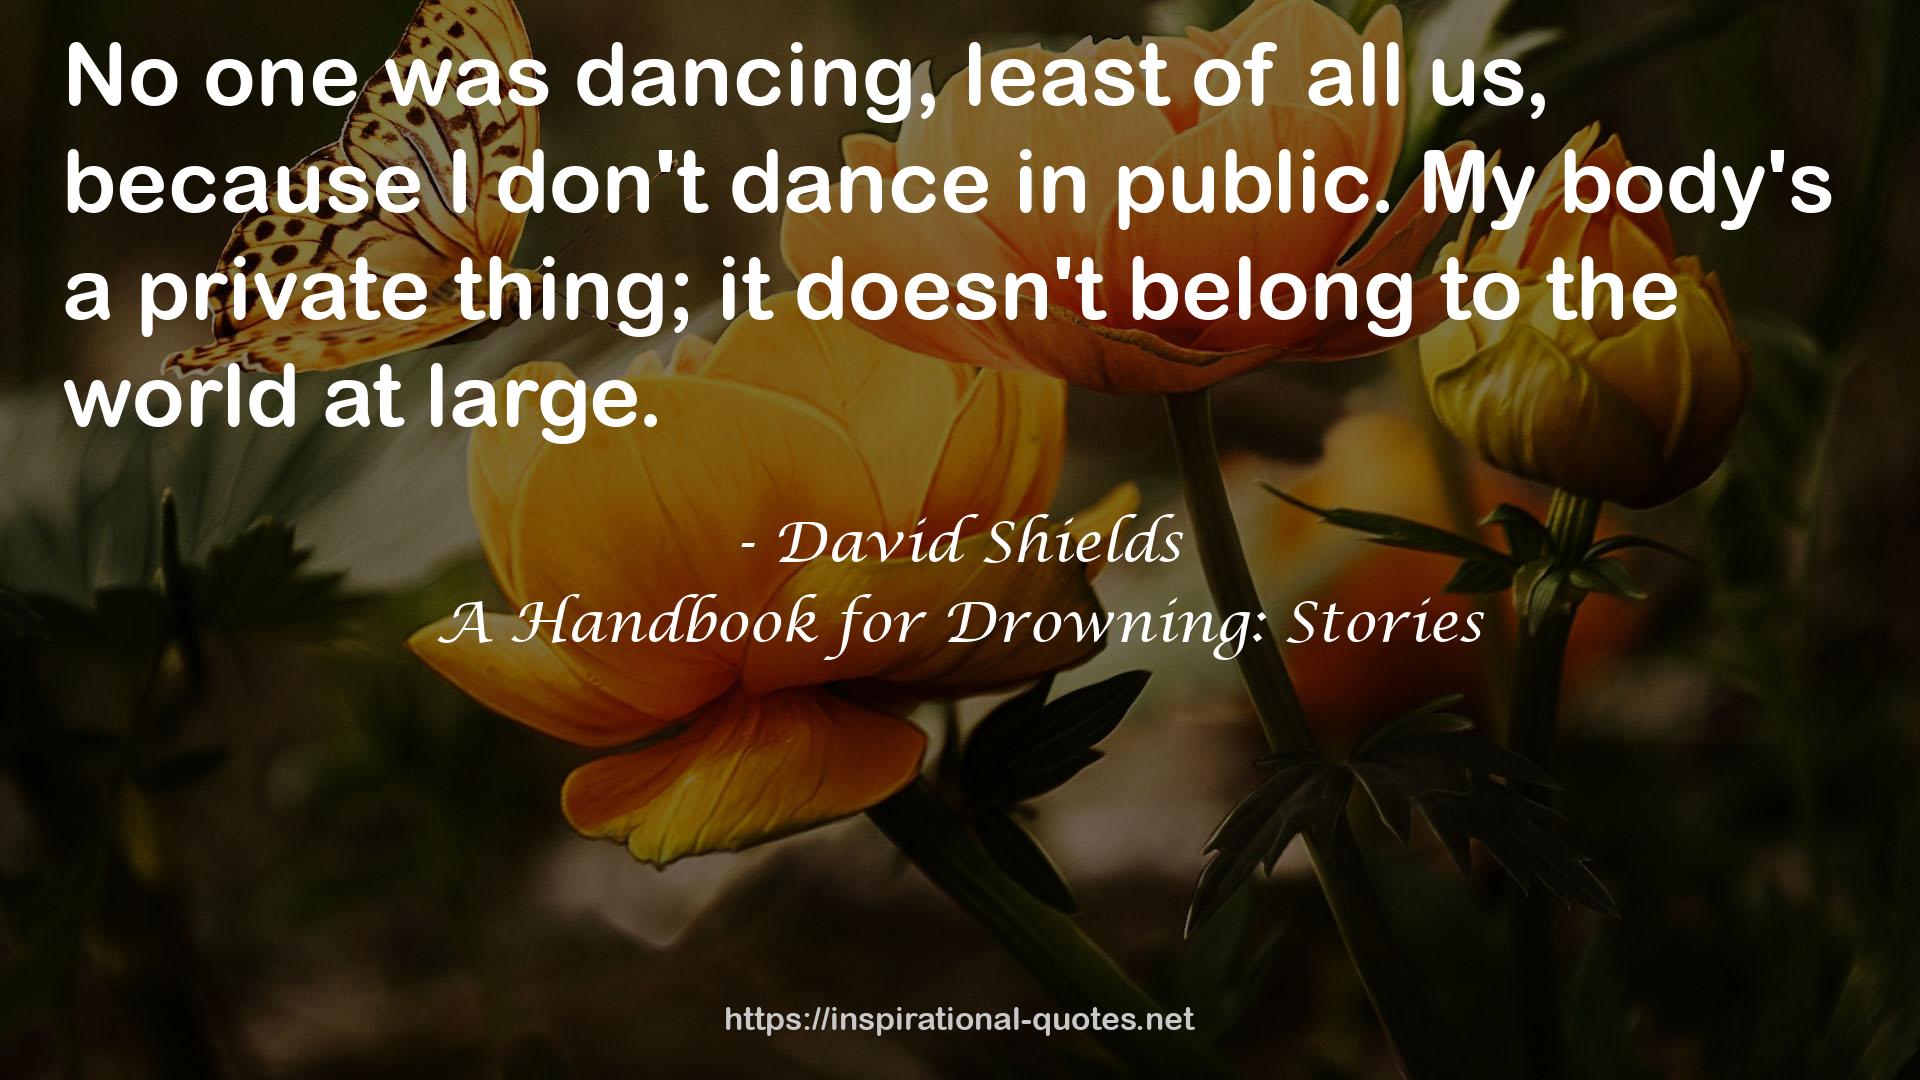 A Handbook for Drowning: Stories QUOTES